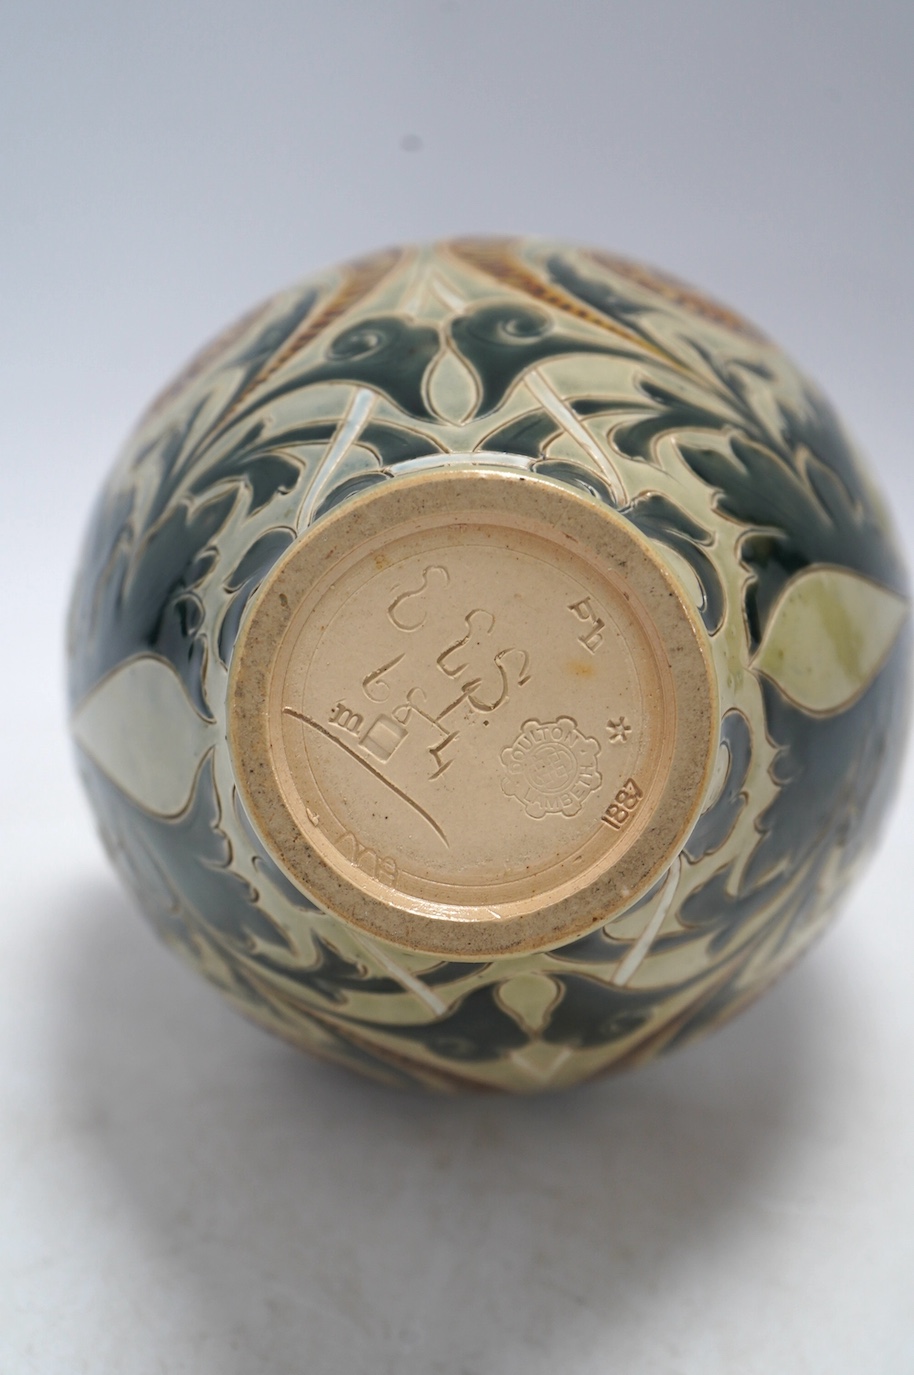 A Doulton Lambeth vase by Eliza Simmance, monogrammed and dated 1887, 20.5cm high. Condition - good